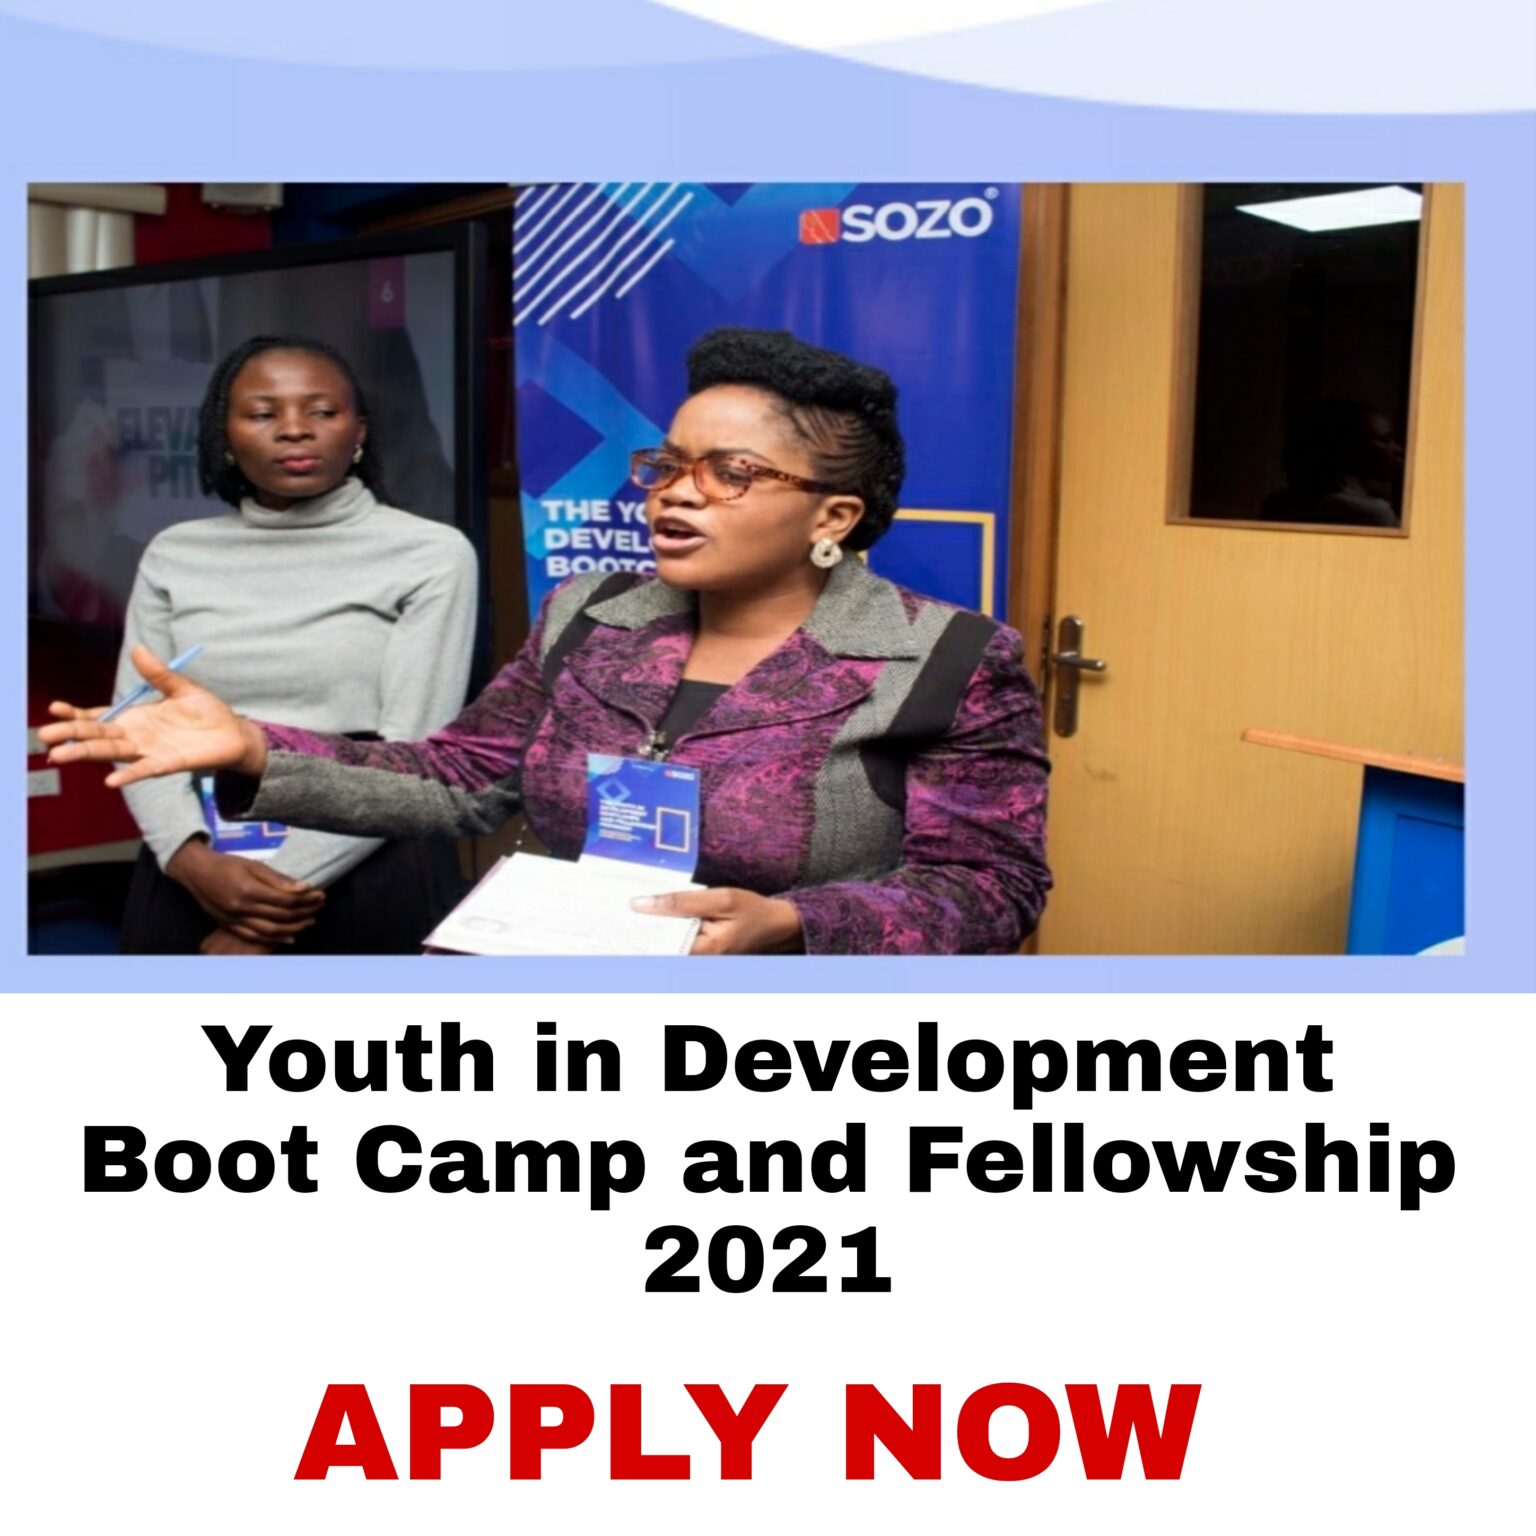 The Youth in Development Boot Camp and Fellowship 2021